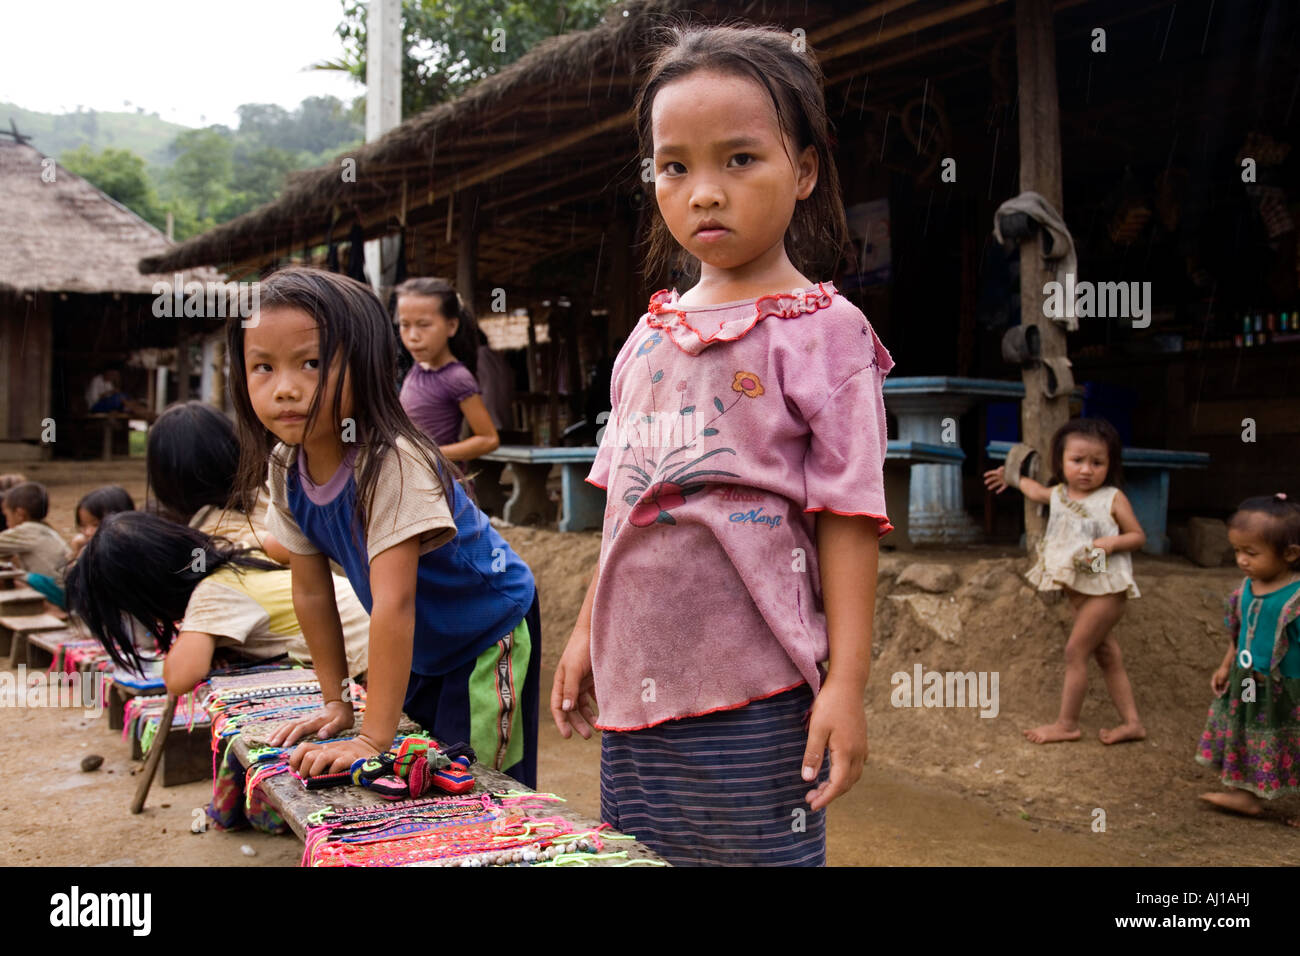 Line of children selling wrist bands to tourists in Hmong tribal village near Luang Prabang Laos Stock Photo